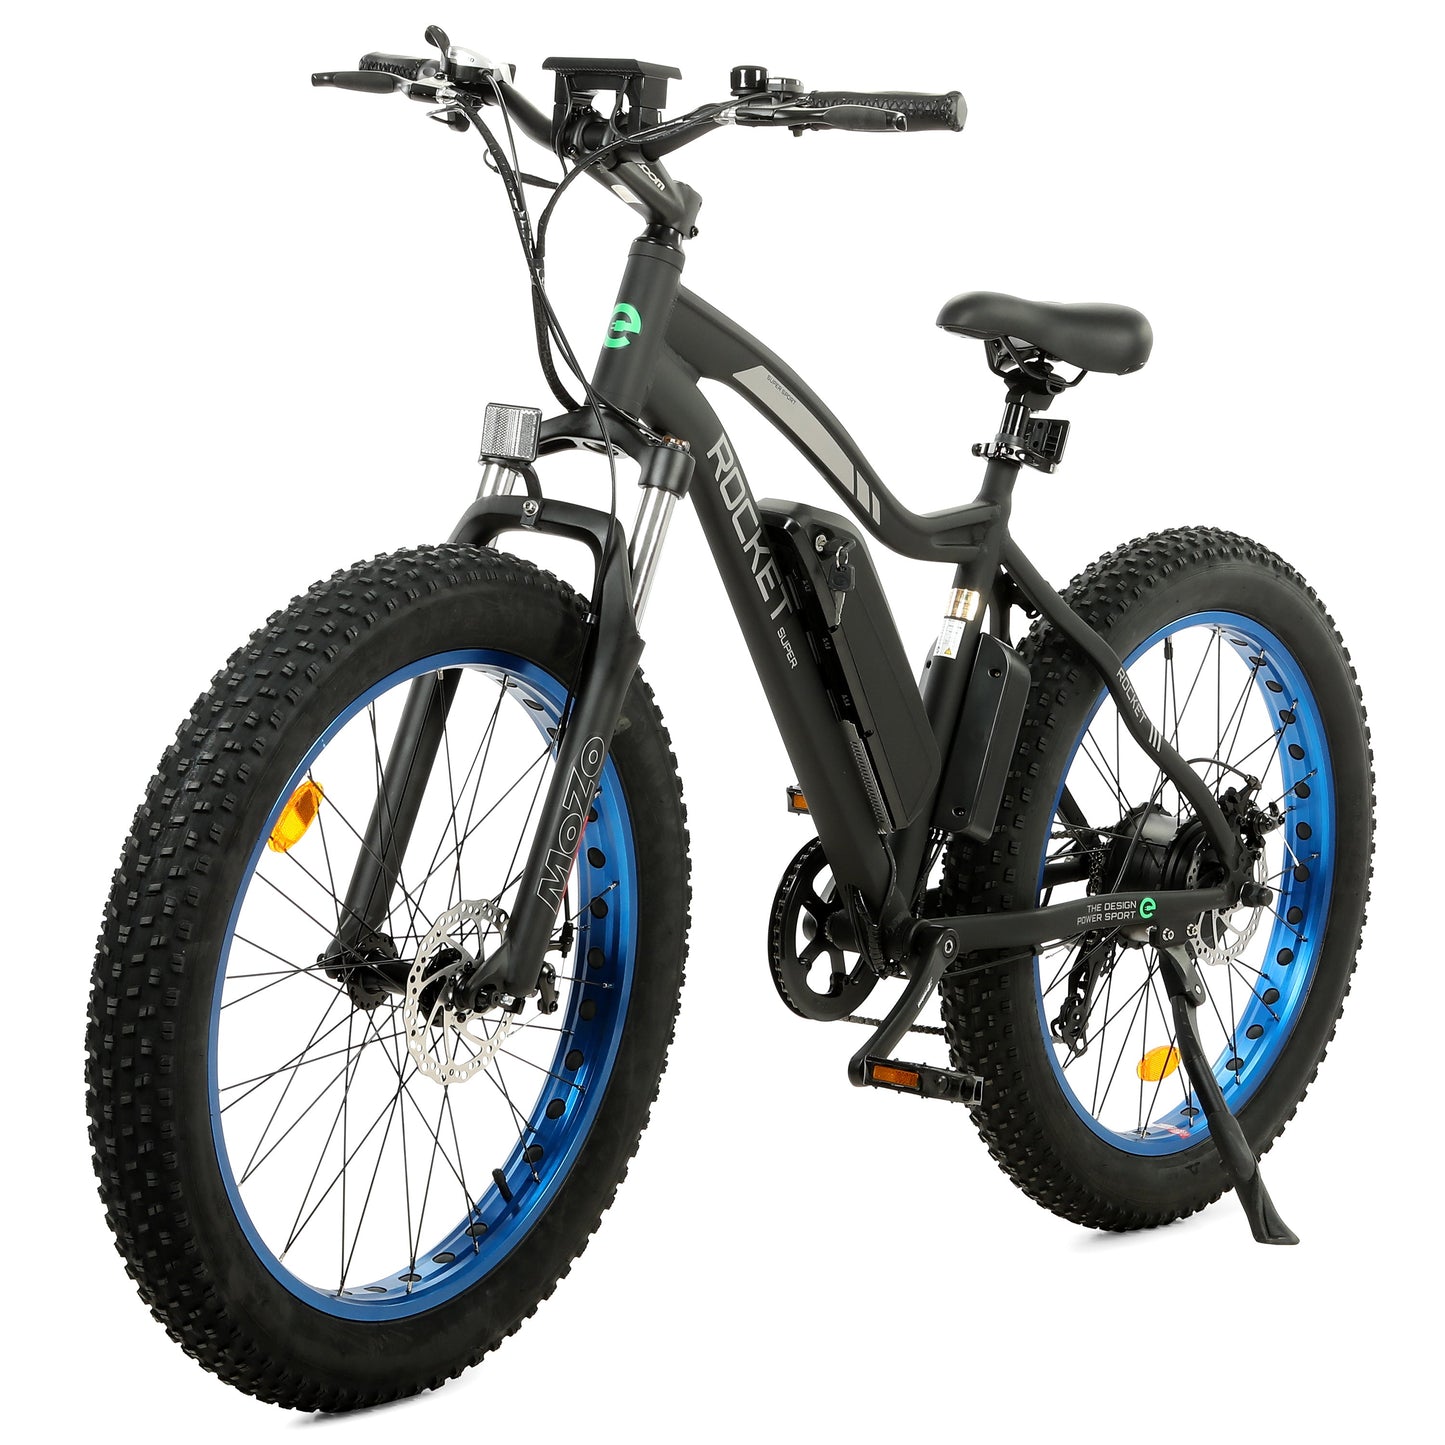 Ecotric Rocket All Terrain Fat Tire Electric Bike w/ 500W Brushless Motor For Long Lifespan, Adjustable Fork Suspension For Smooth and Comfort - Leisure, Commute, Trail Riders